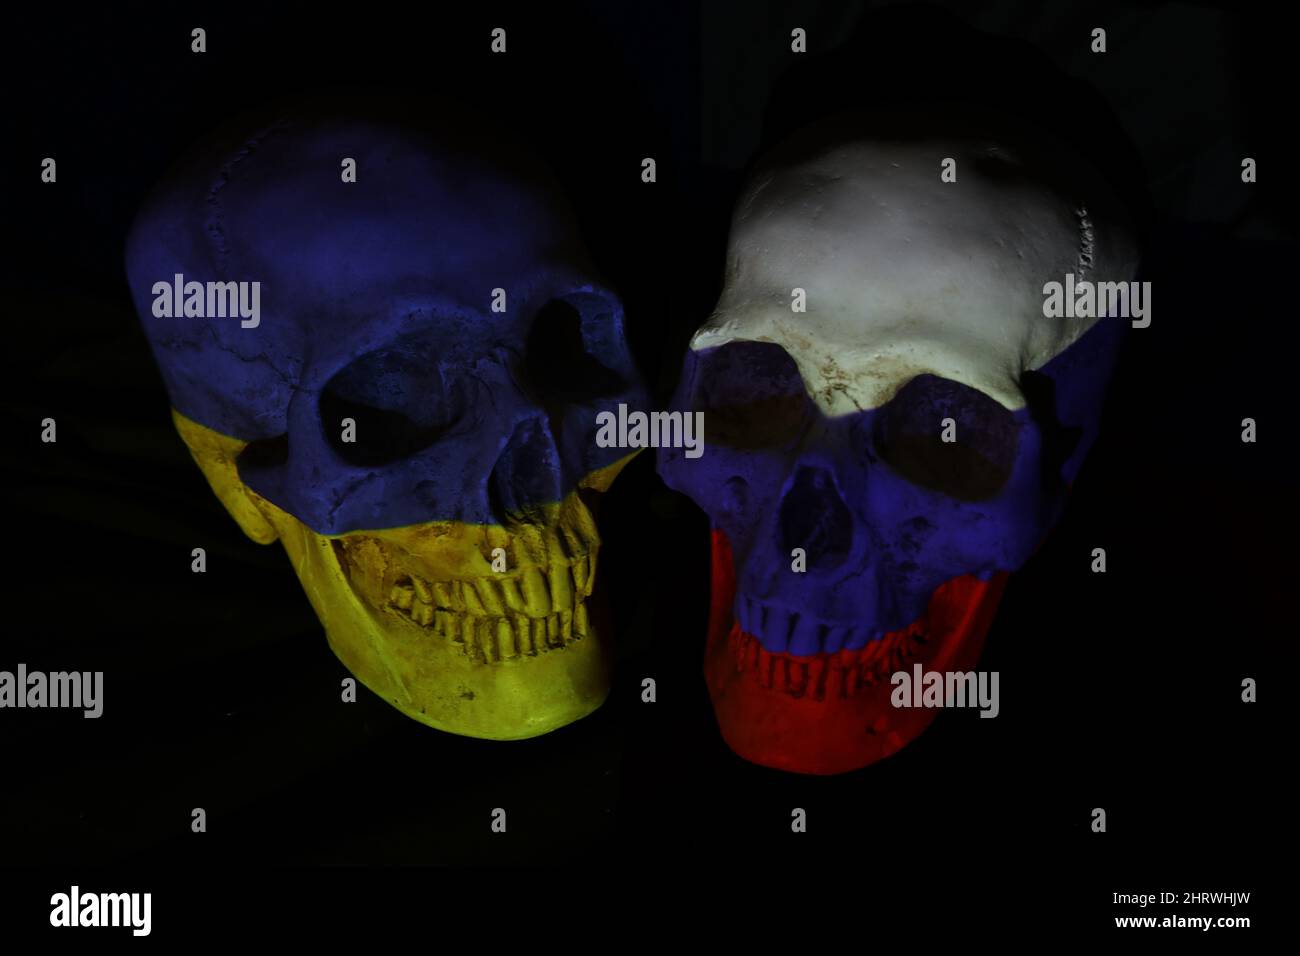 Two opposing skulls colored with the national flags of Russia and Ukraine projected on them. Darkened threatening theme. Conflict war tension concept. Stock Photo